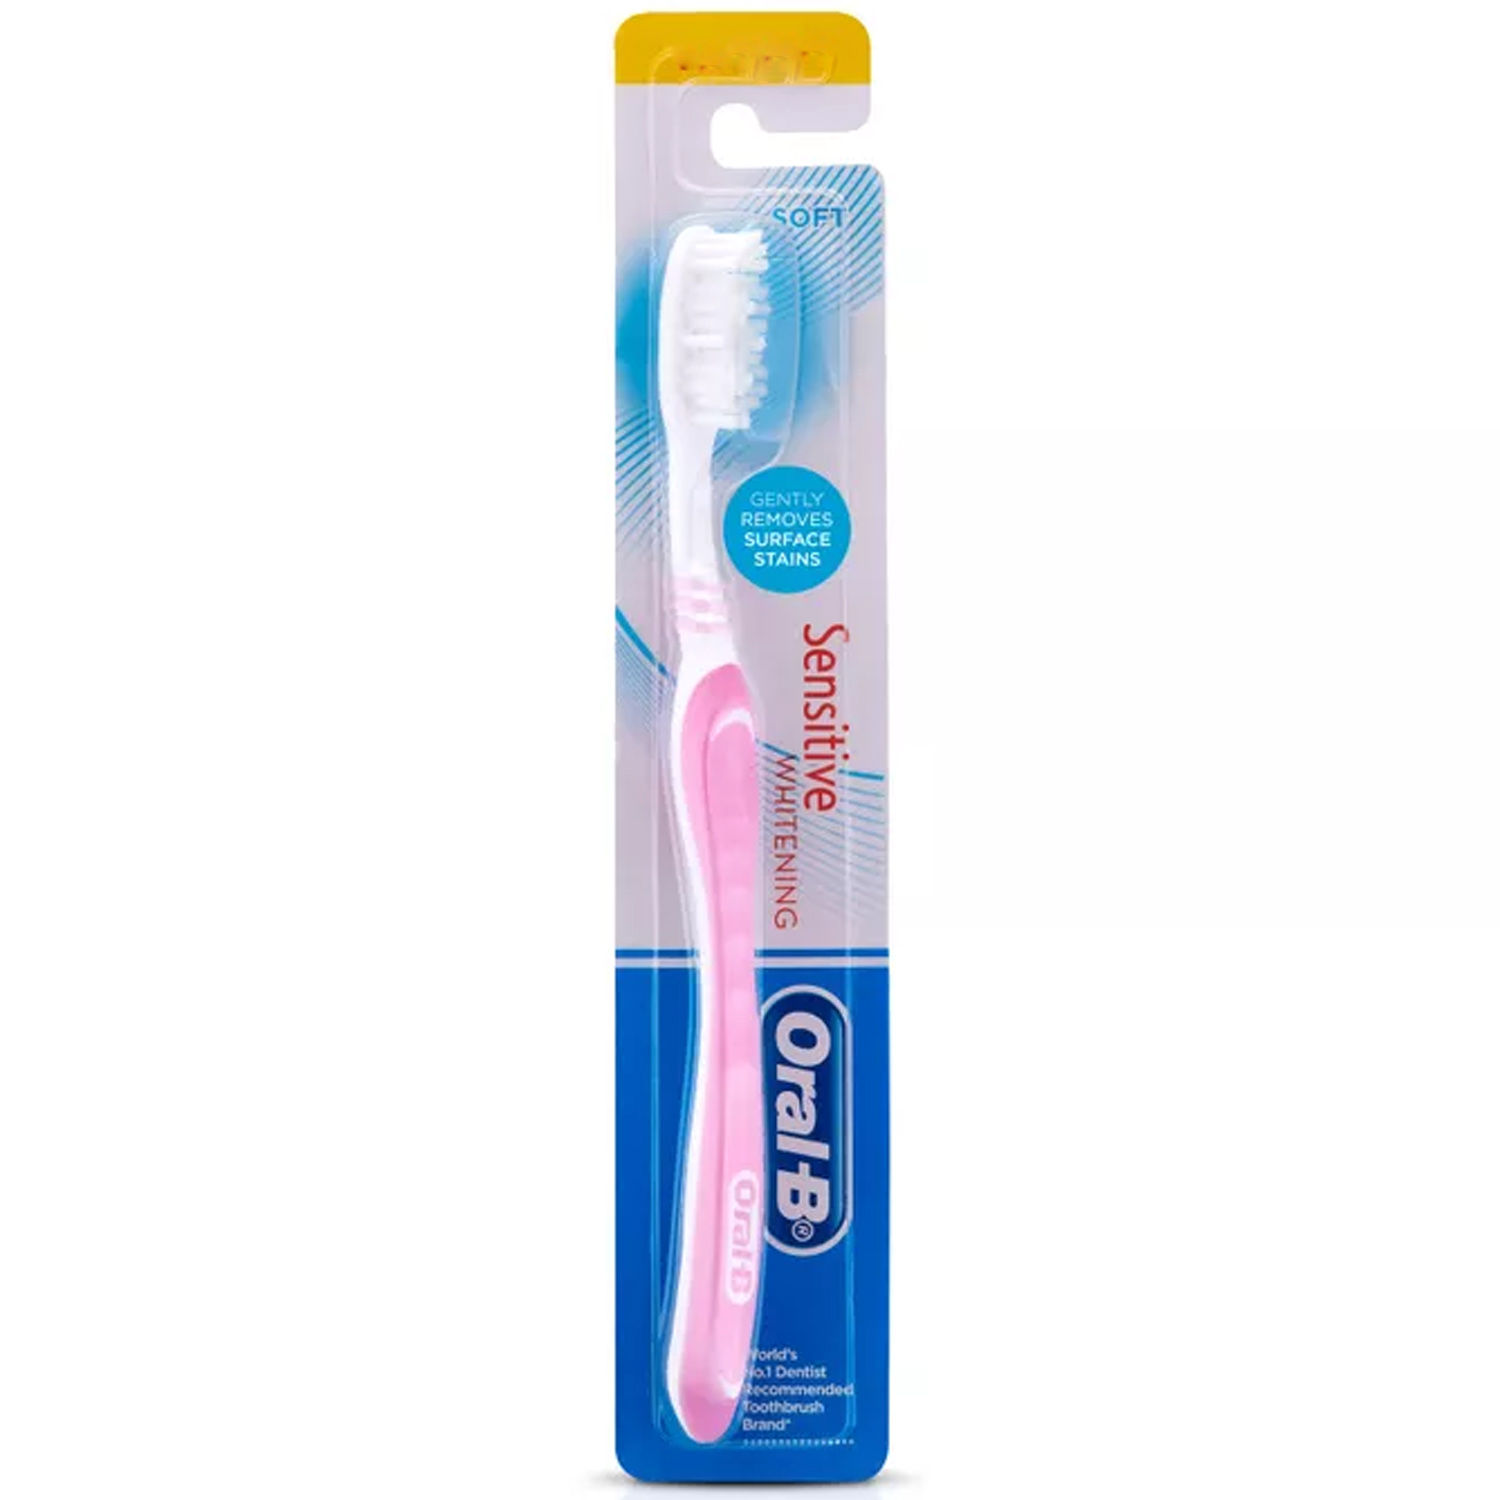 Oral-B Sensitive Whitening Soft Toothbrush, 1 Count, Pack of 1 